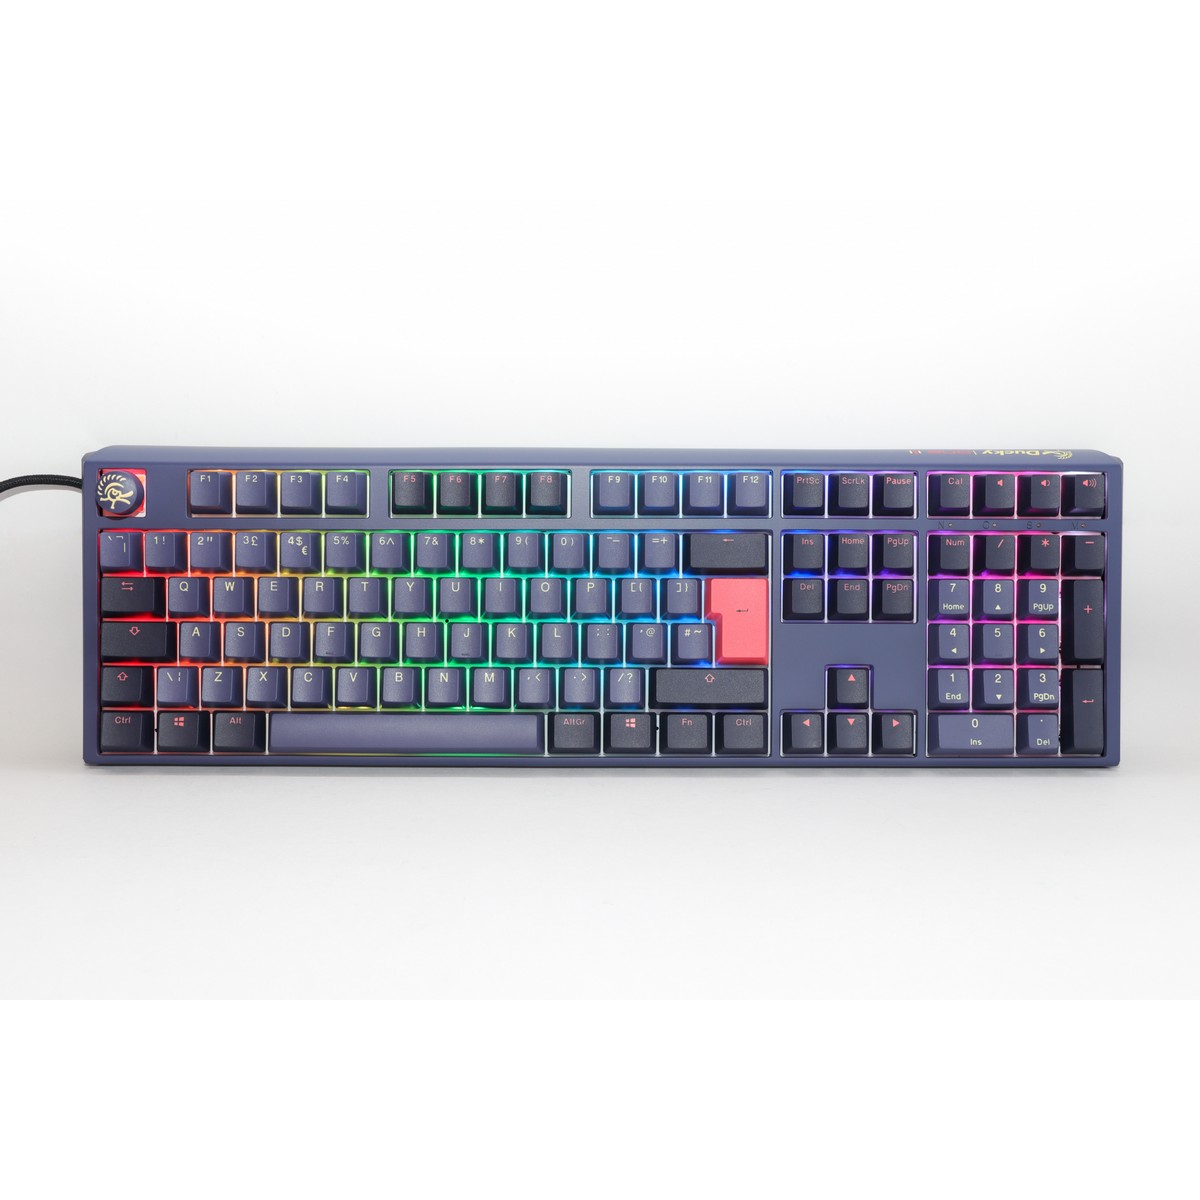 Ducky One 3 Cosmic USB RGB Mechanical Gaming Keyboard Cherry MX Brown Switch - UK Layout